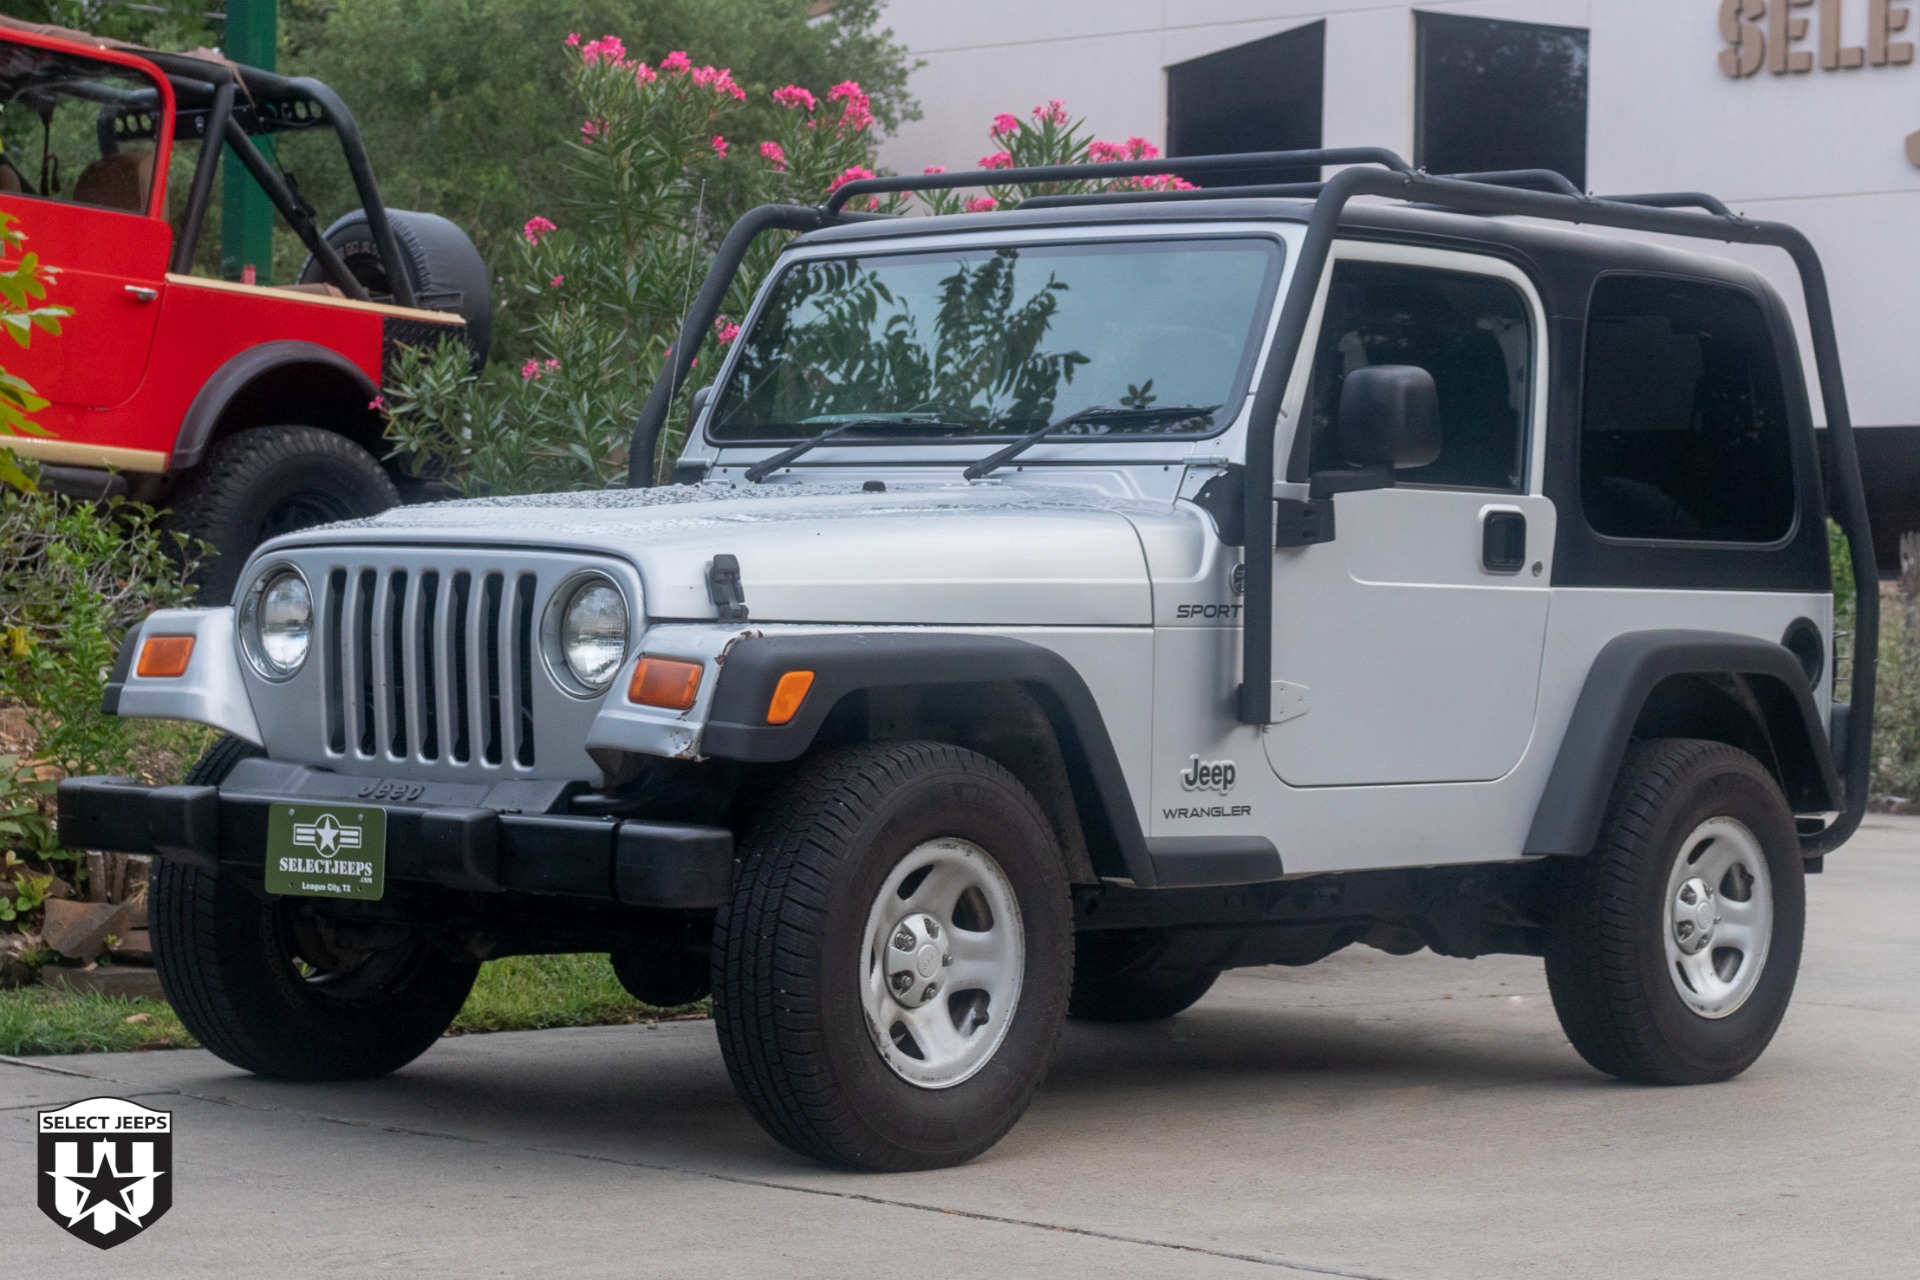 Used 2006 Jeep Wrangler Sport RHD For Sale ($10,995) | Select Jeeps Inc.  Stock #744883